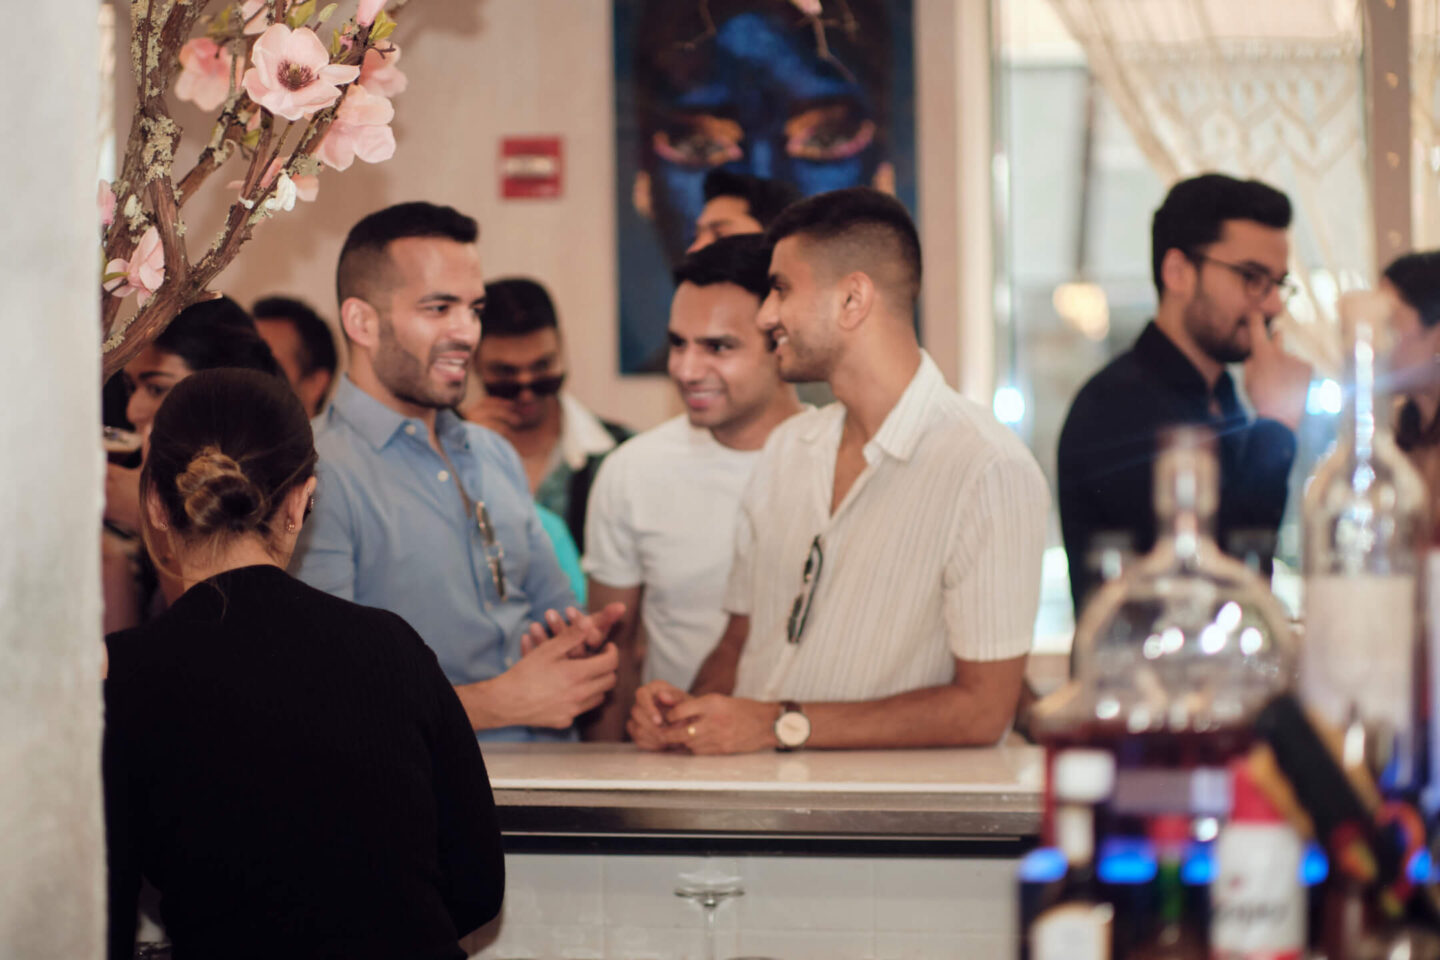 Sehal's 25th Birthday Party - Skinos, New York - Event Photography - Lifestyle Photography - Group Photography 